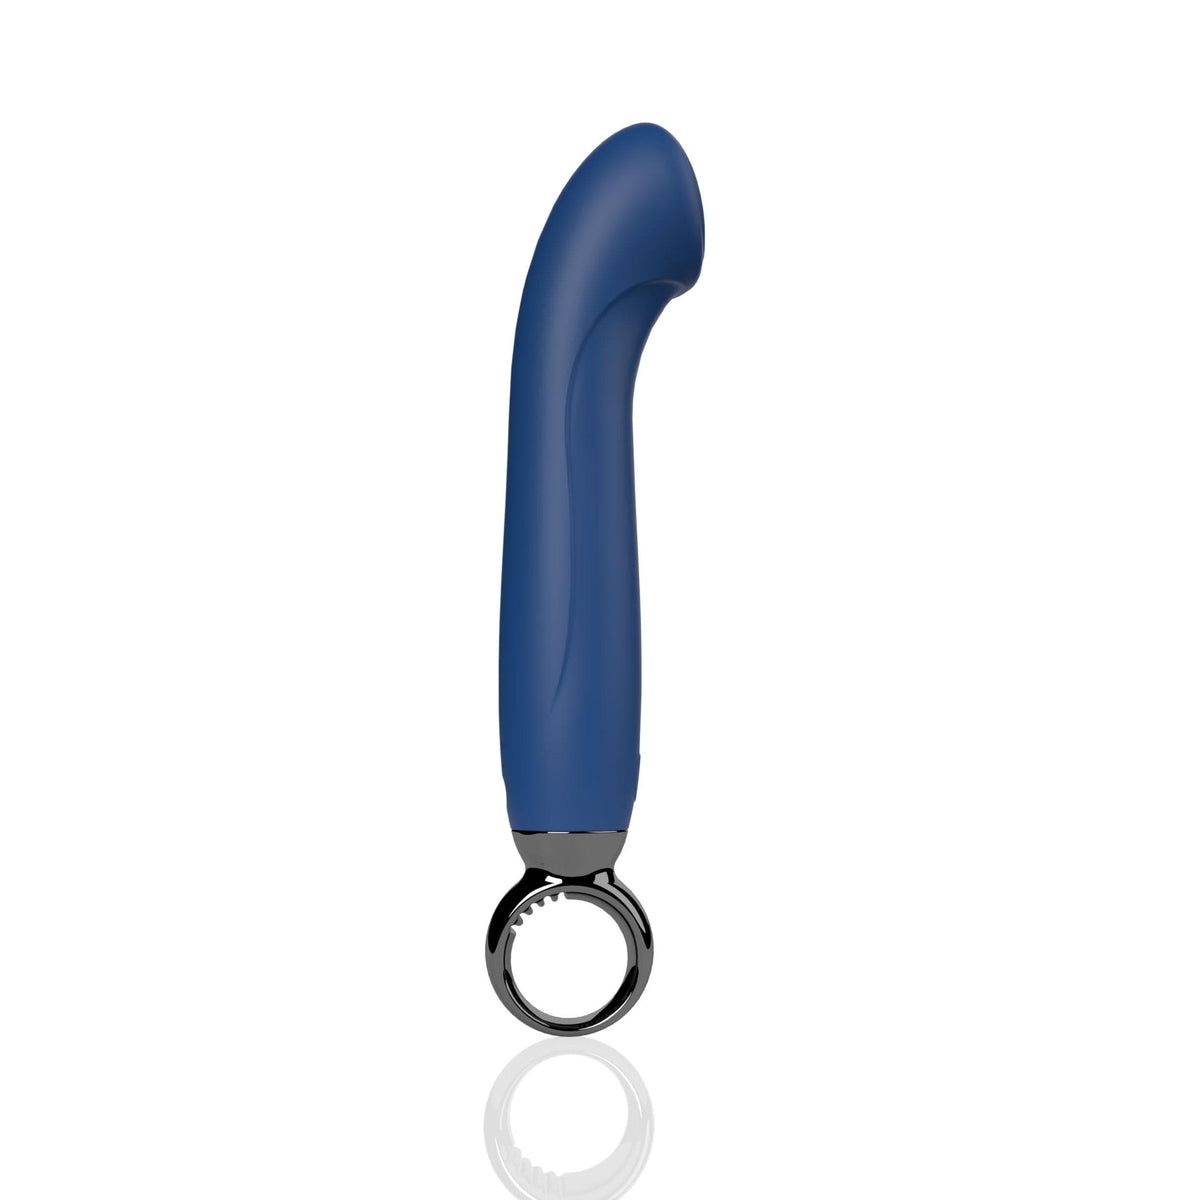 primo g spot rechargeable vibrator blueberry